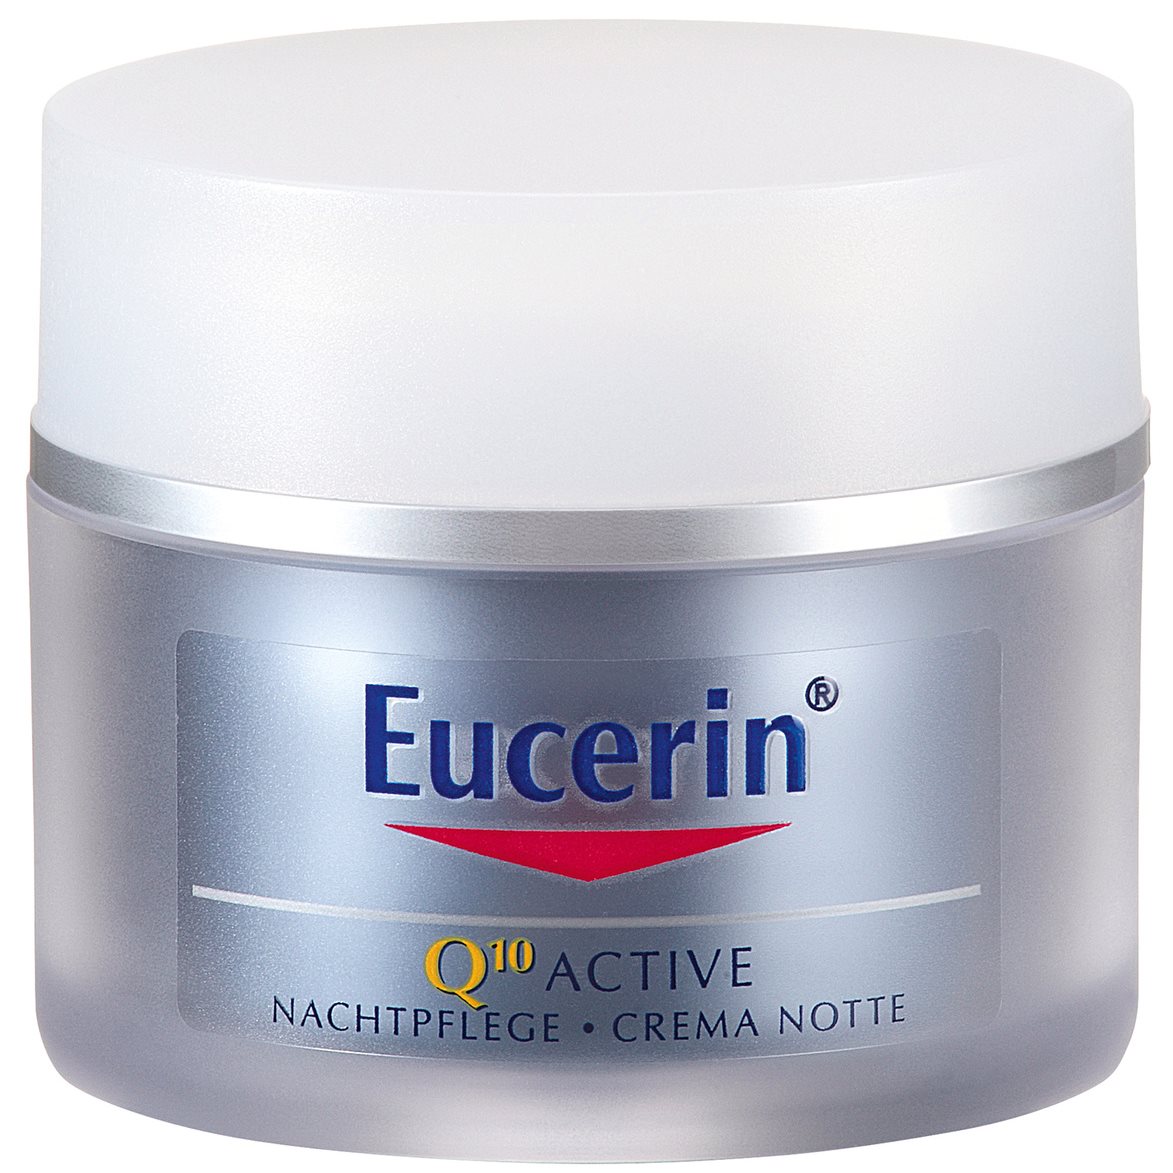 Eucerin Q10 Night Cream for sensitive skin with Coenzyme Q10 to and speed skin regeneration, reducing wrinkles while sleep.